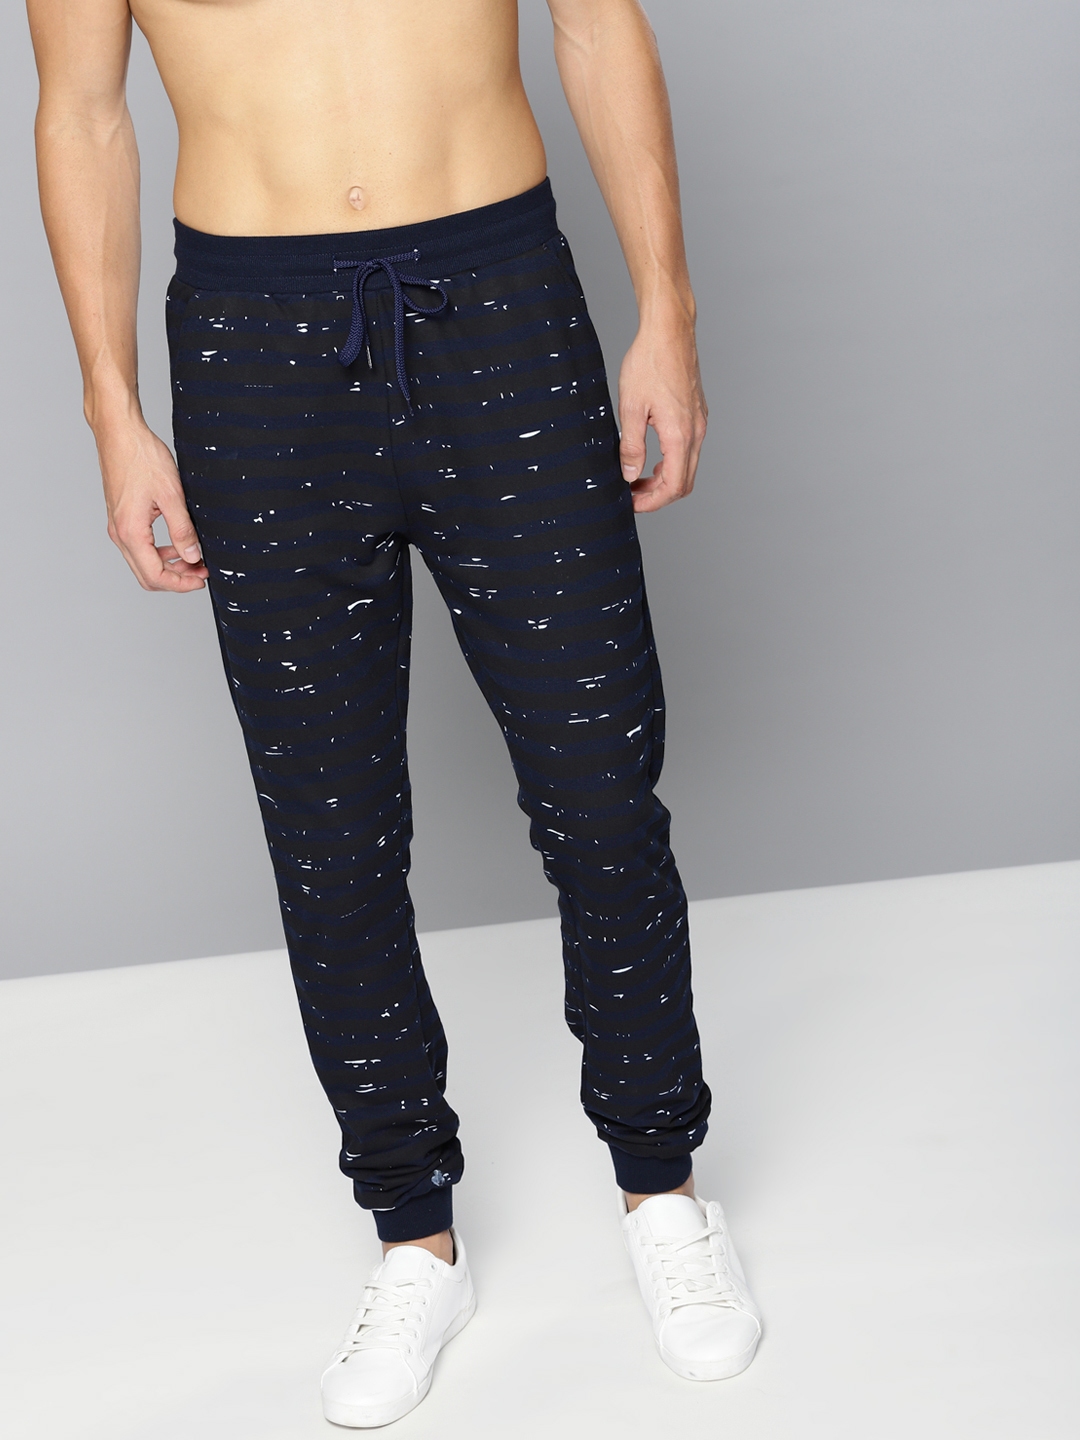 black joggers with blue stripe